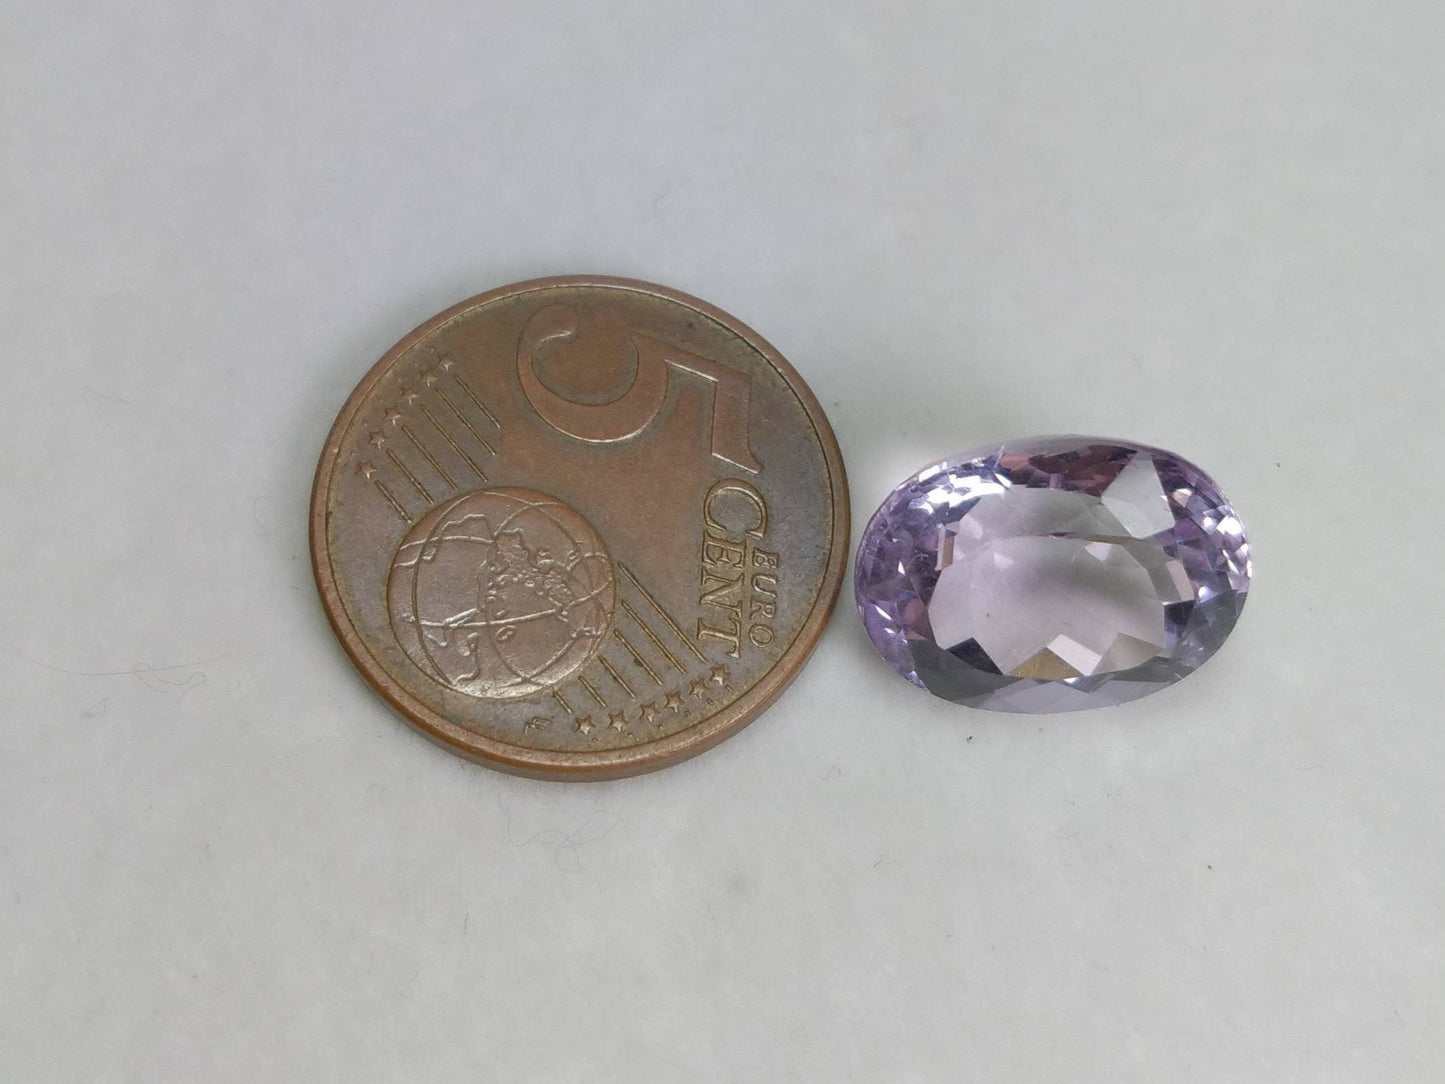 ARSAA GEMS AND MINERALSNatural fine quality beautiful 9 carats VV clarity faceted oval shape amethyst gem - Premium  from ARSAA GEMS AND MINERALS - Just $18.00! Shop now at ARSAA GEMS AND MINERALS